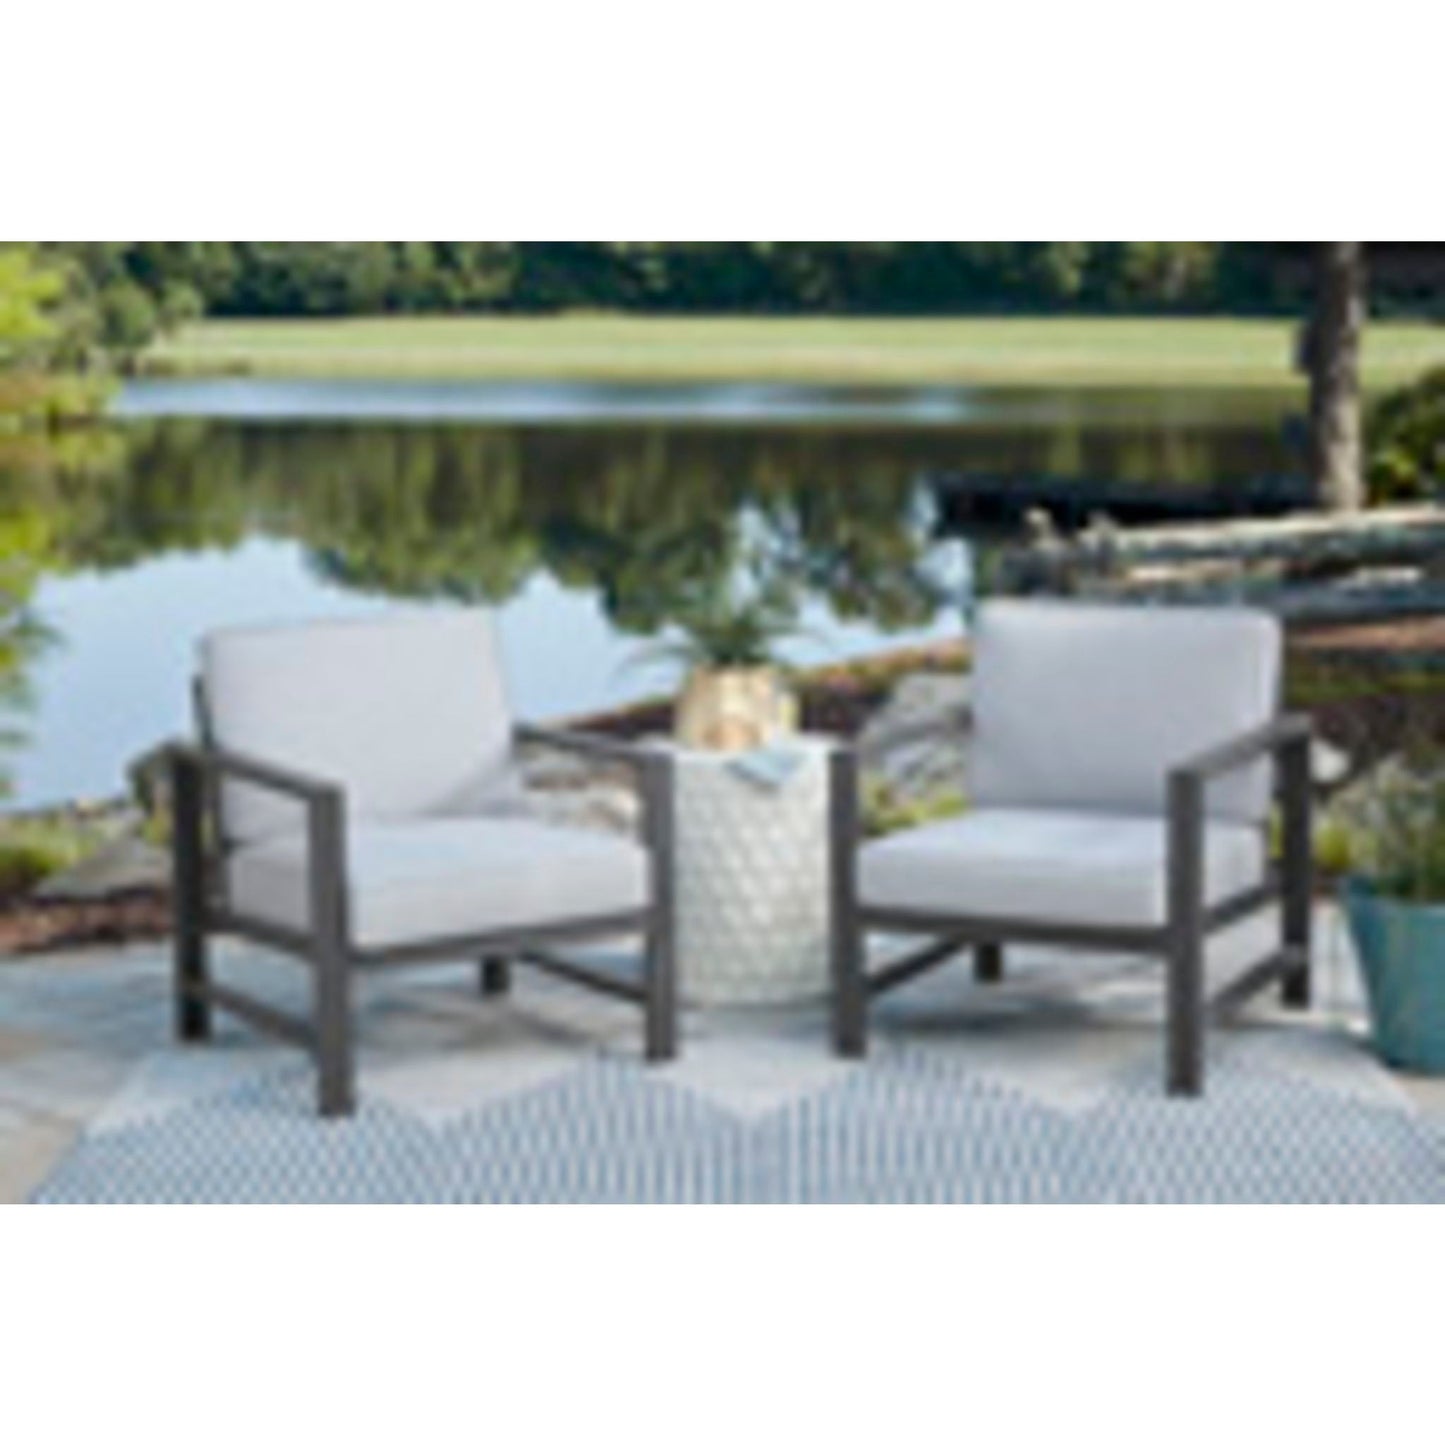 Outdoor Fynnegan Lounge Chair-Set of 2 Gray